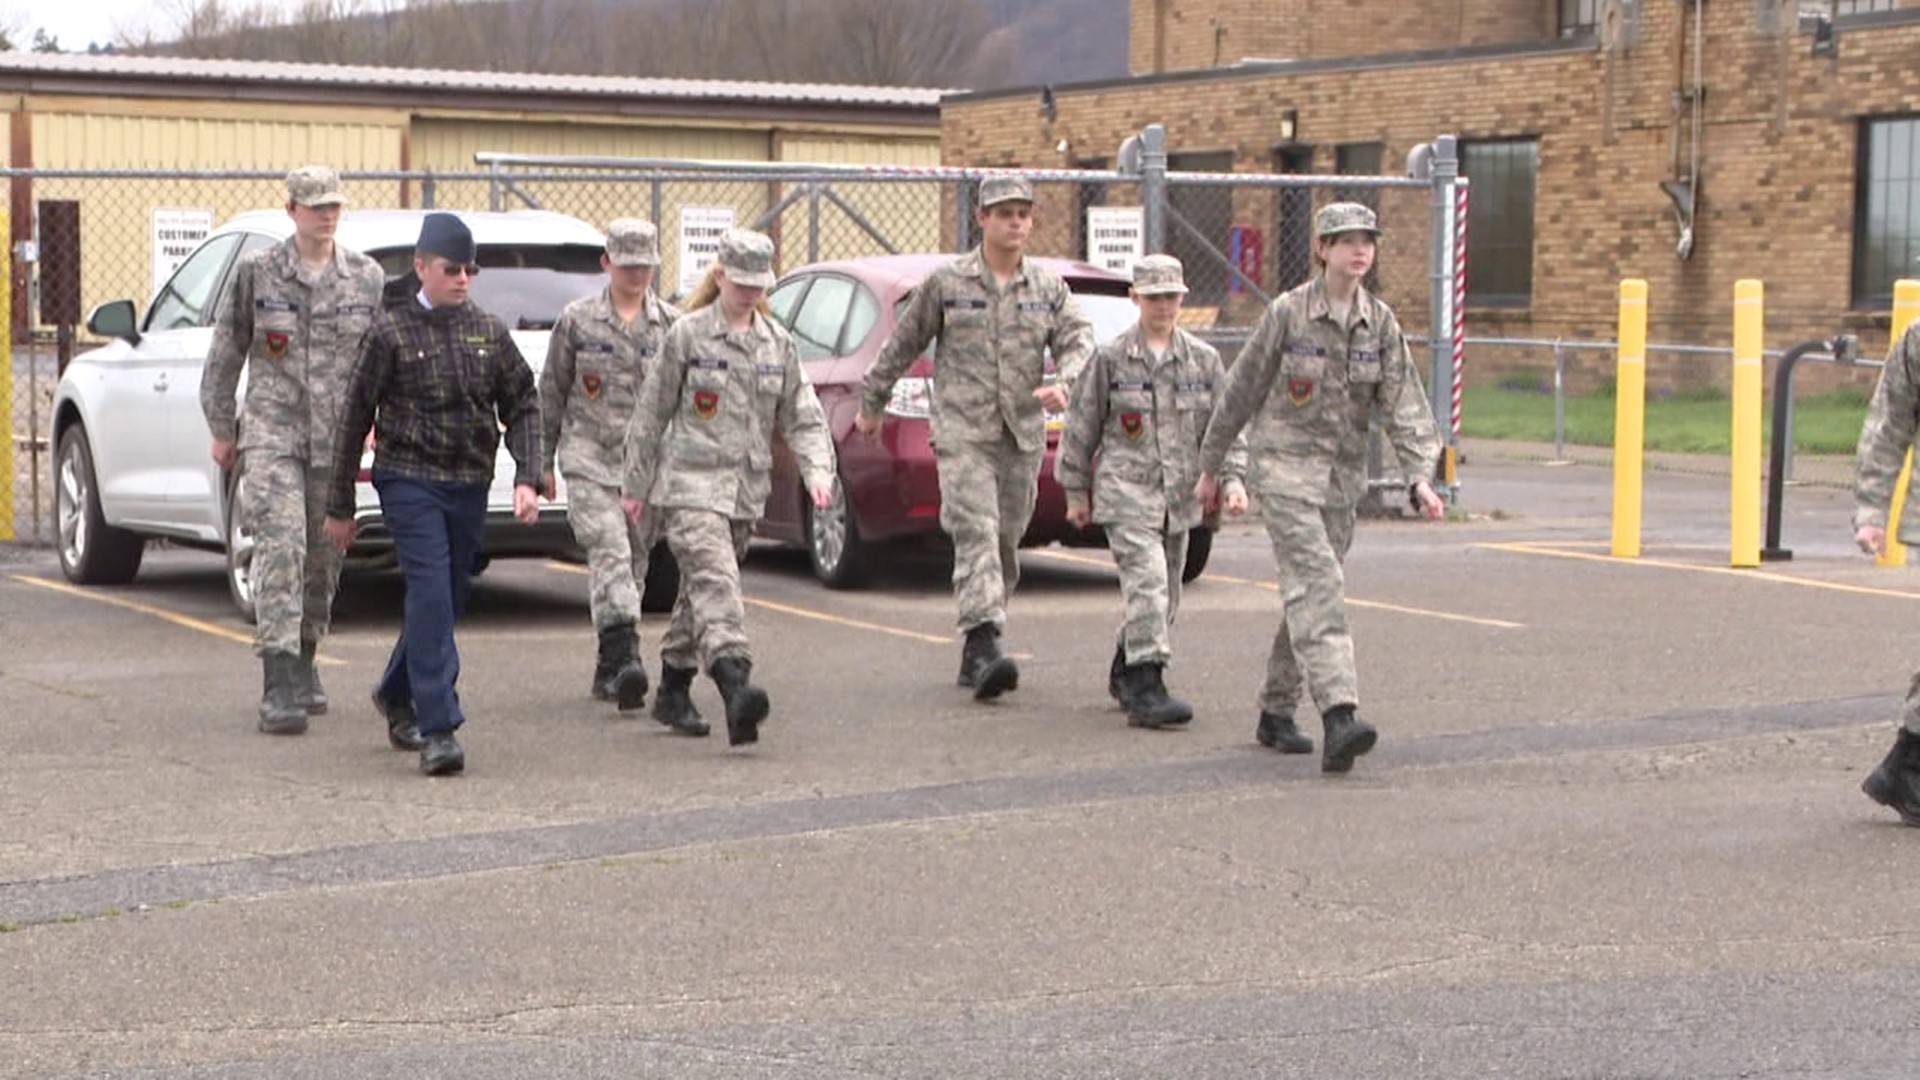 Even though it was raining for a lot of the day, folks still came out to an airport in Luzerne County to learn about the Civil Air Patrol.